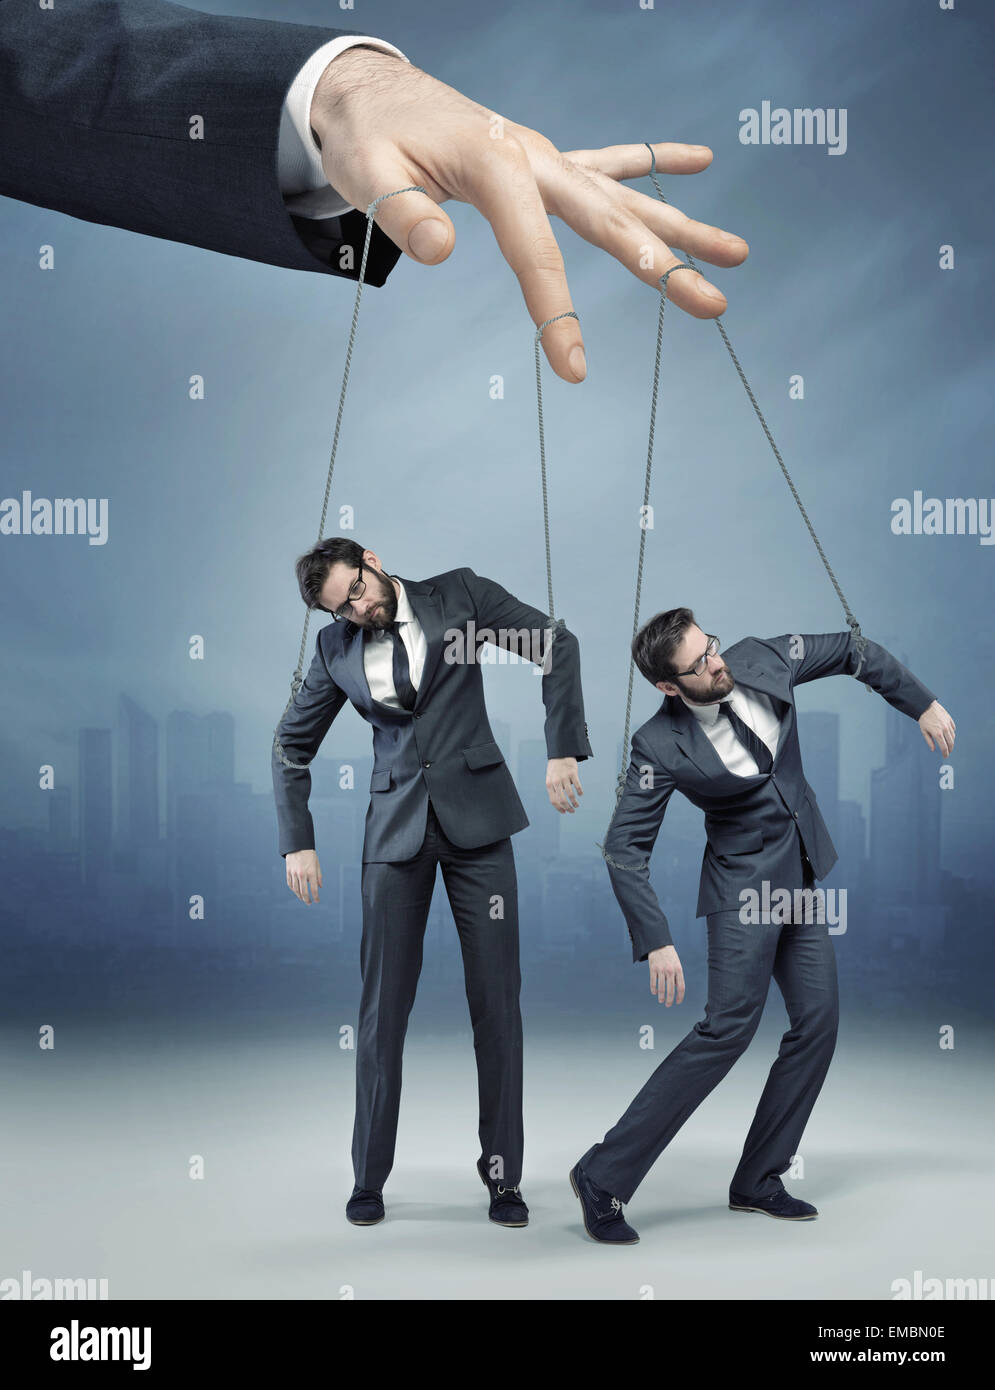 The Human Hand with Marionette on the Strings. Stock Image - Image of  dominate, cult: 219682073